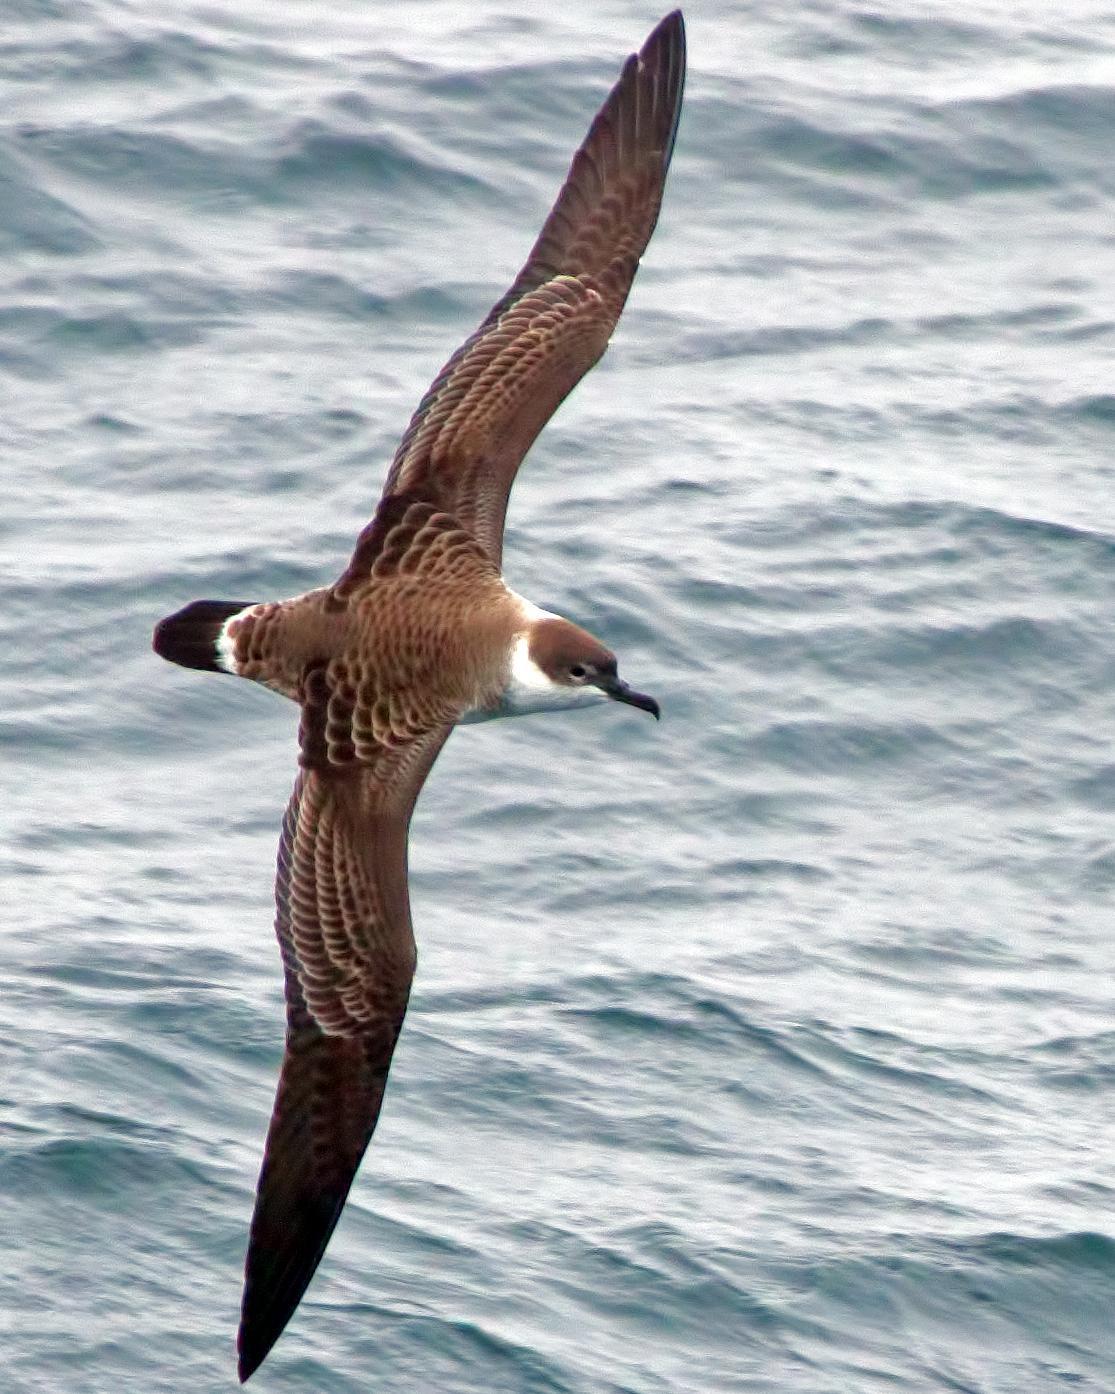 Great Shearwater Photo by Rob Dickerson